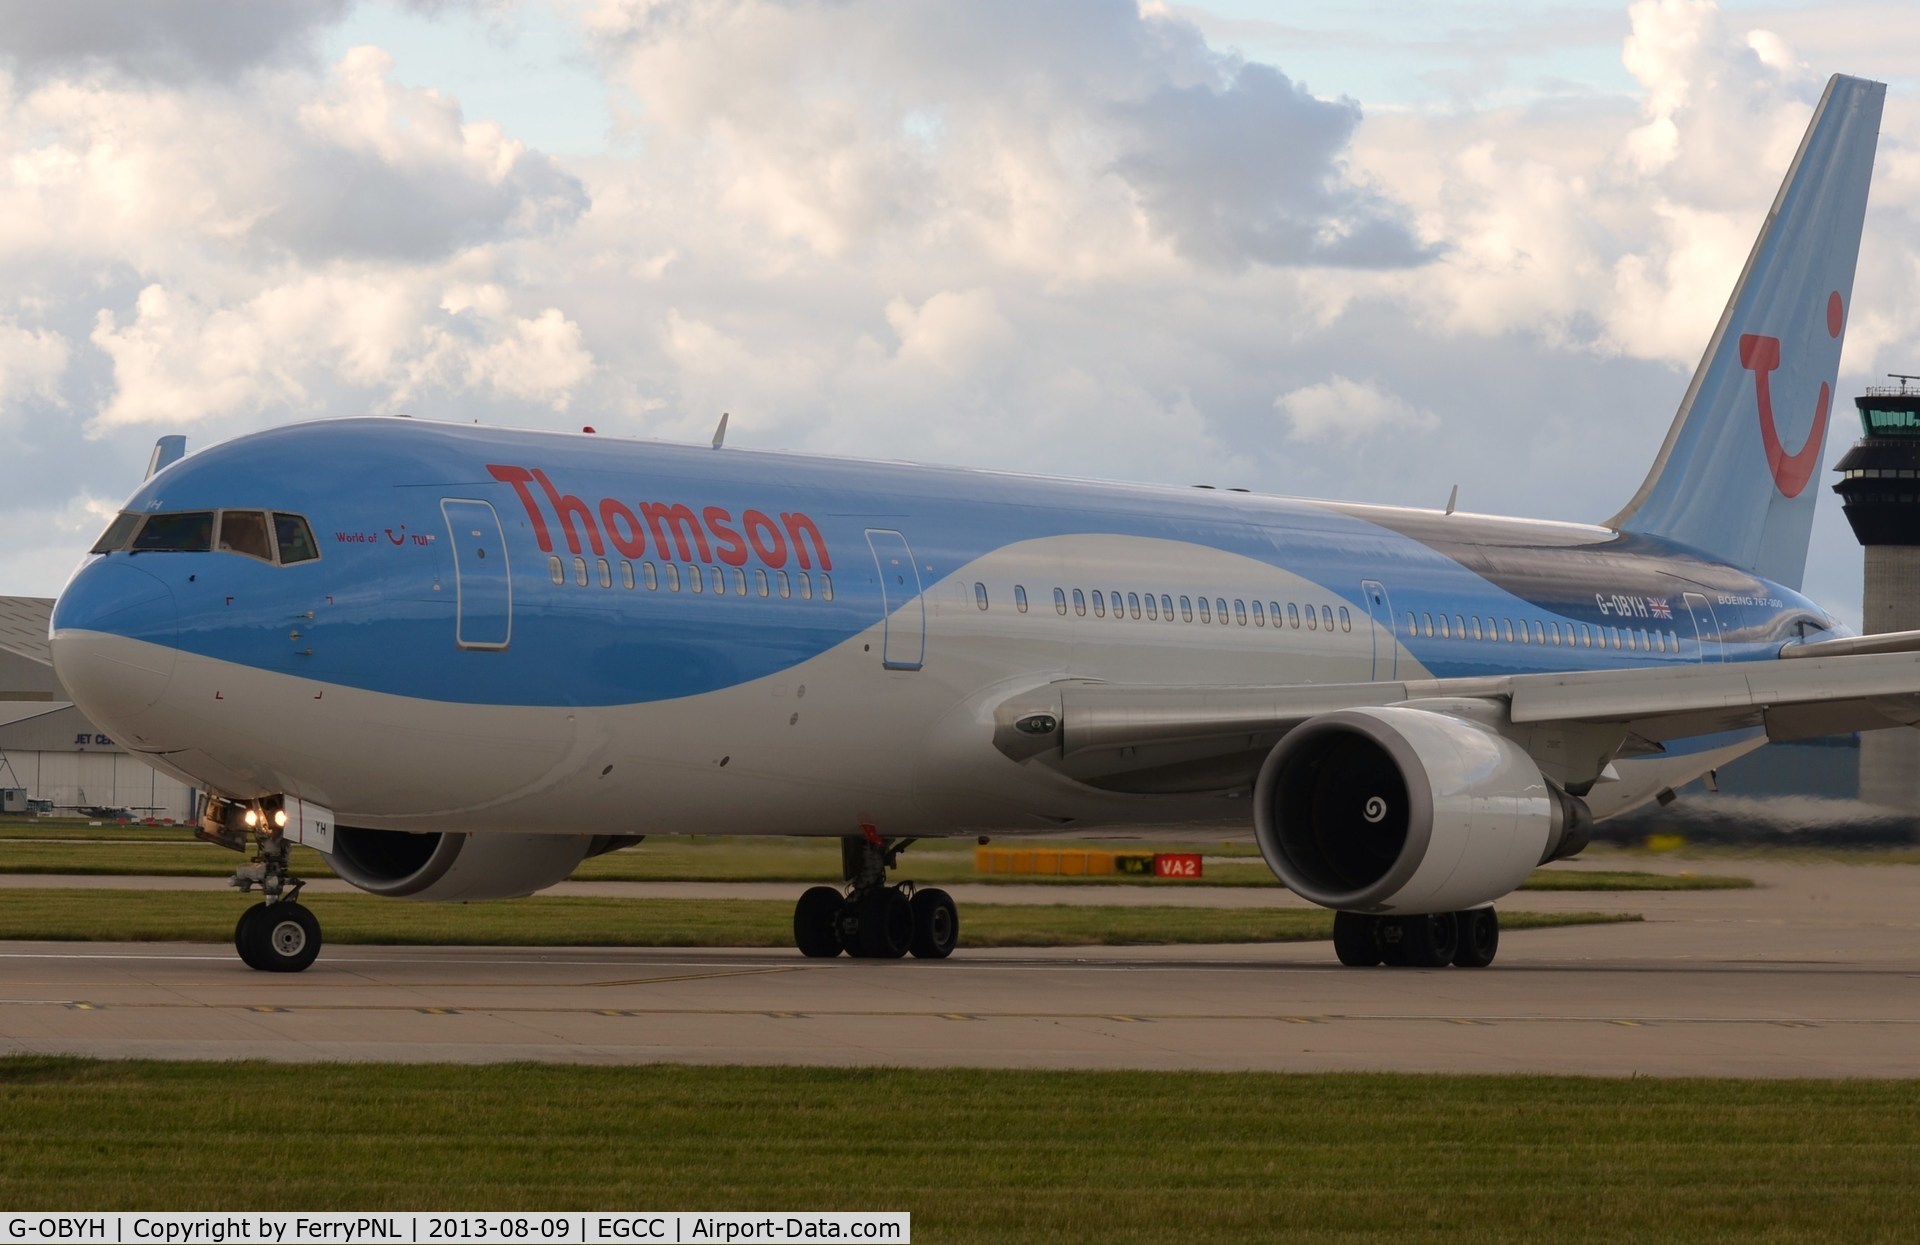 G-OBYH, 1999 Boeing 767-304/ER C/N 28883, Thomson B763 in new colors lining up